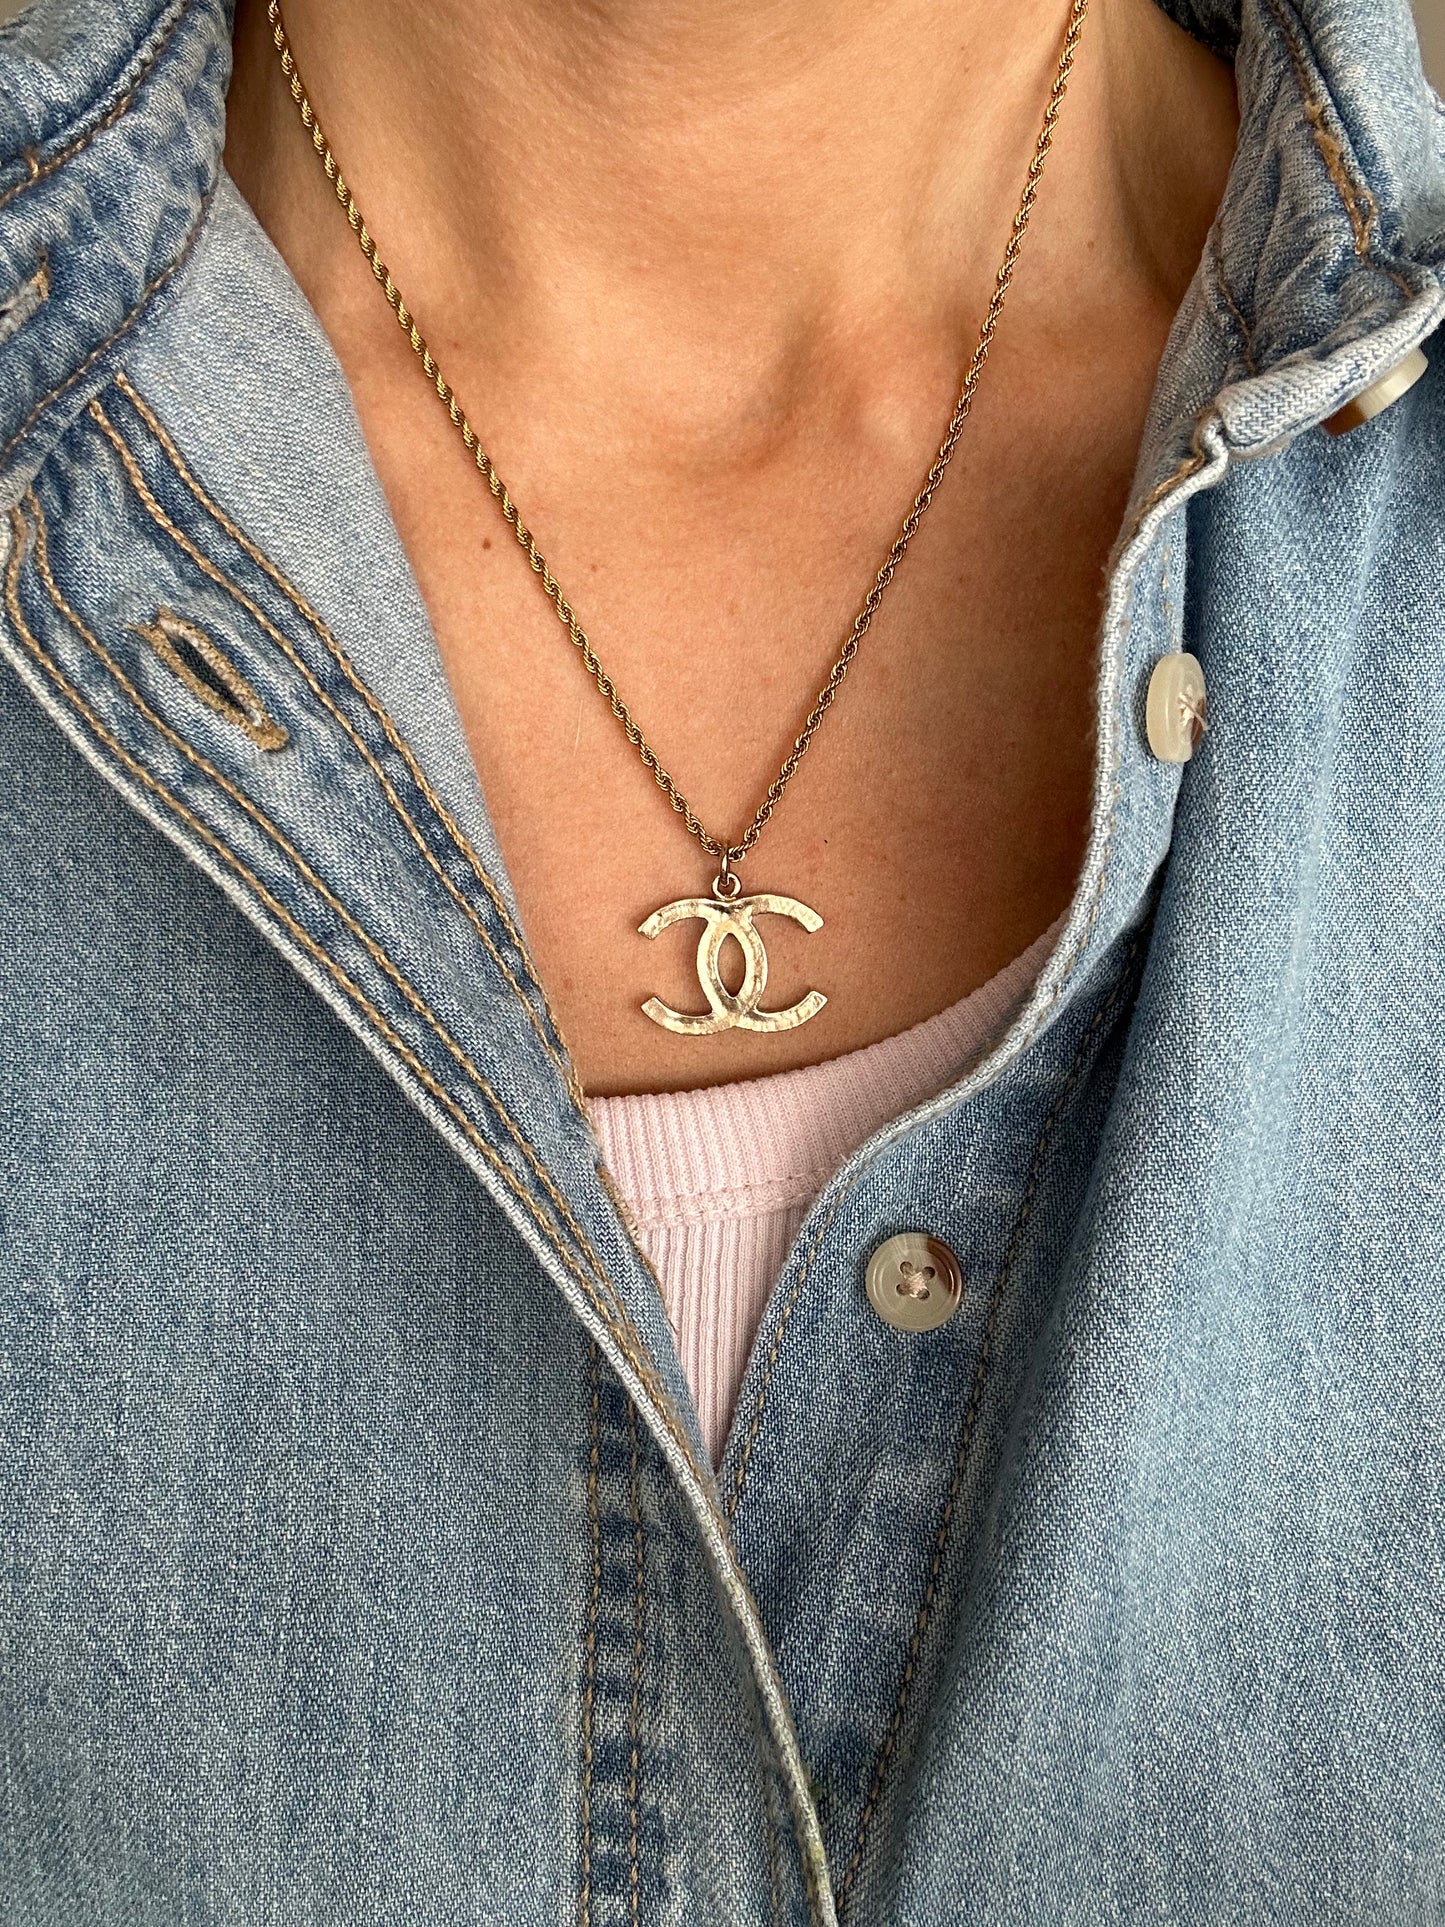 Authentic Chanel CC Pendant  Reworked Gold 17.5 Necklace